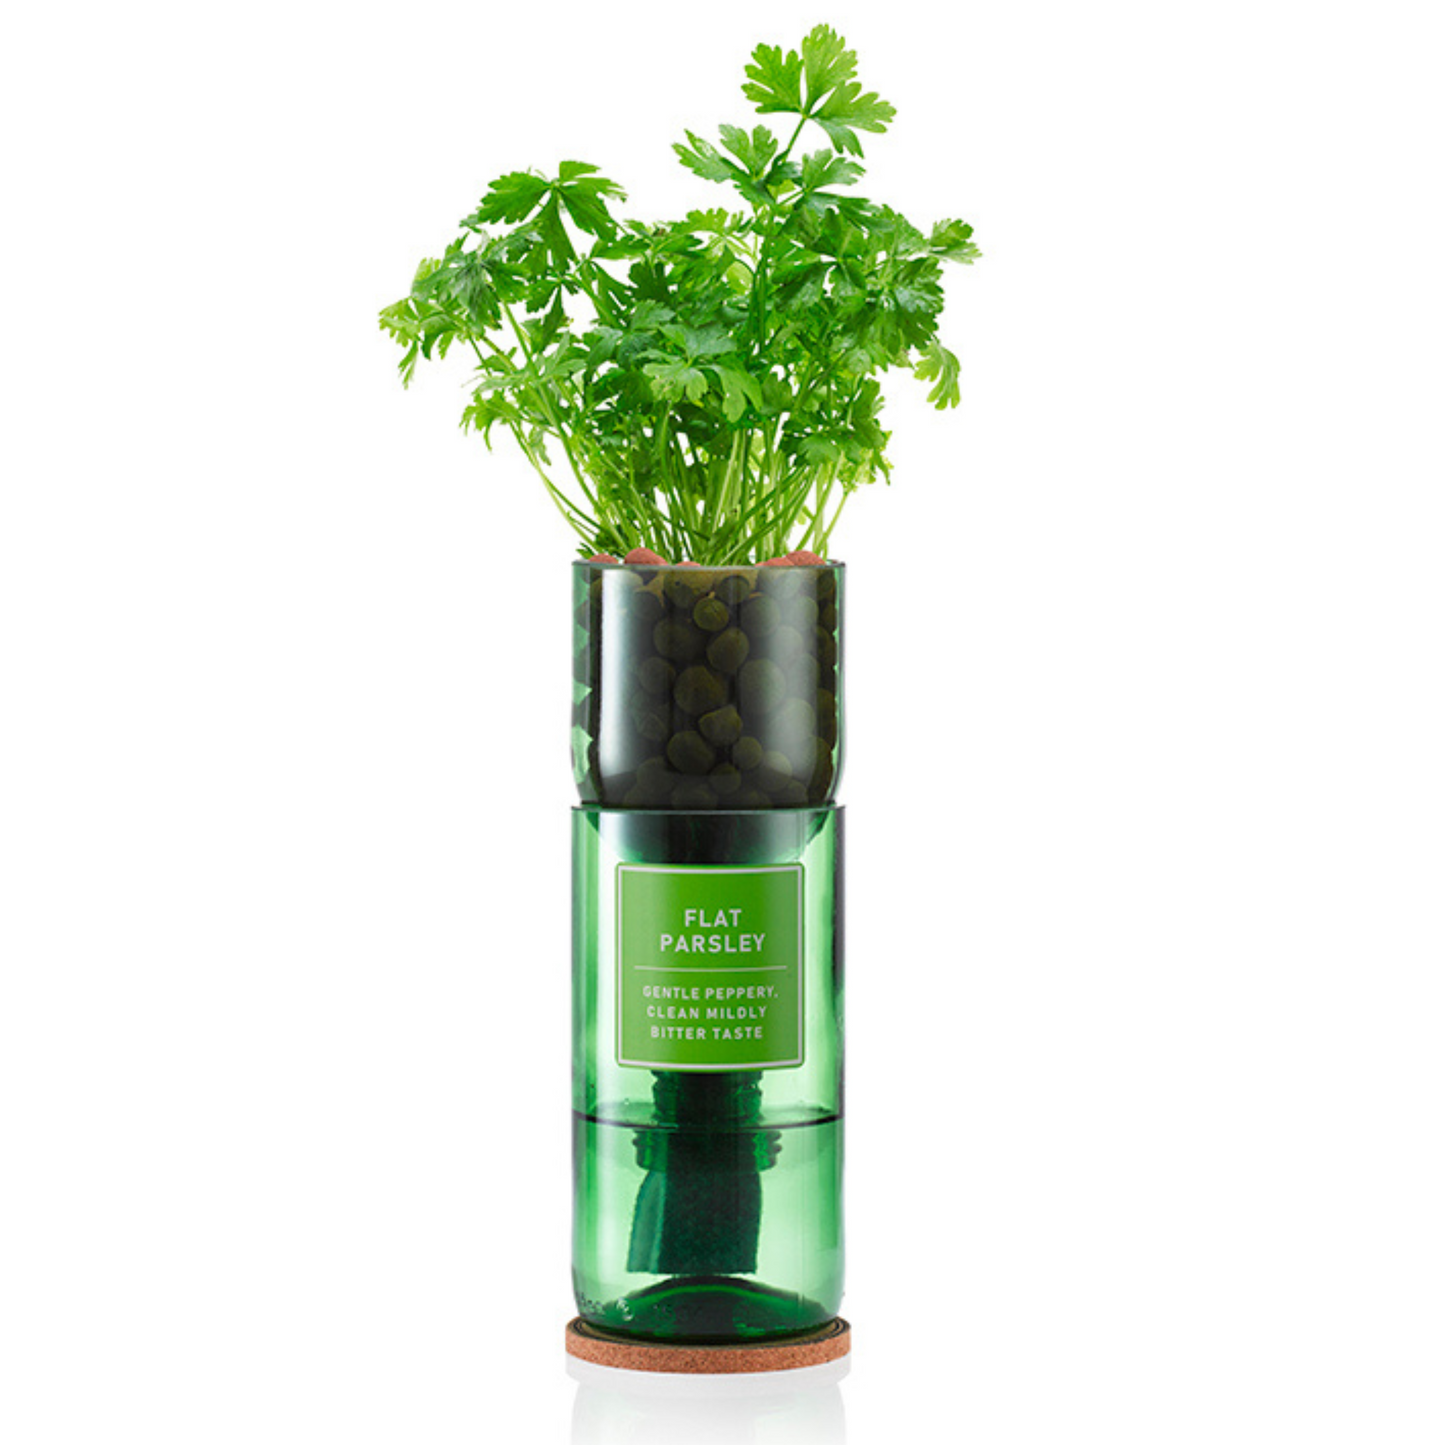 Flat parsley growing out of a glass vase